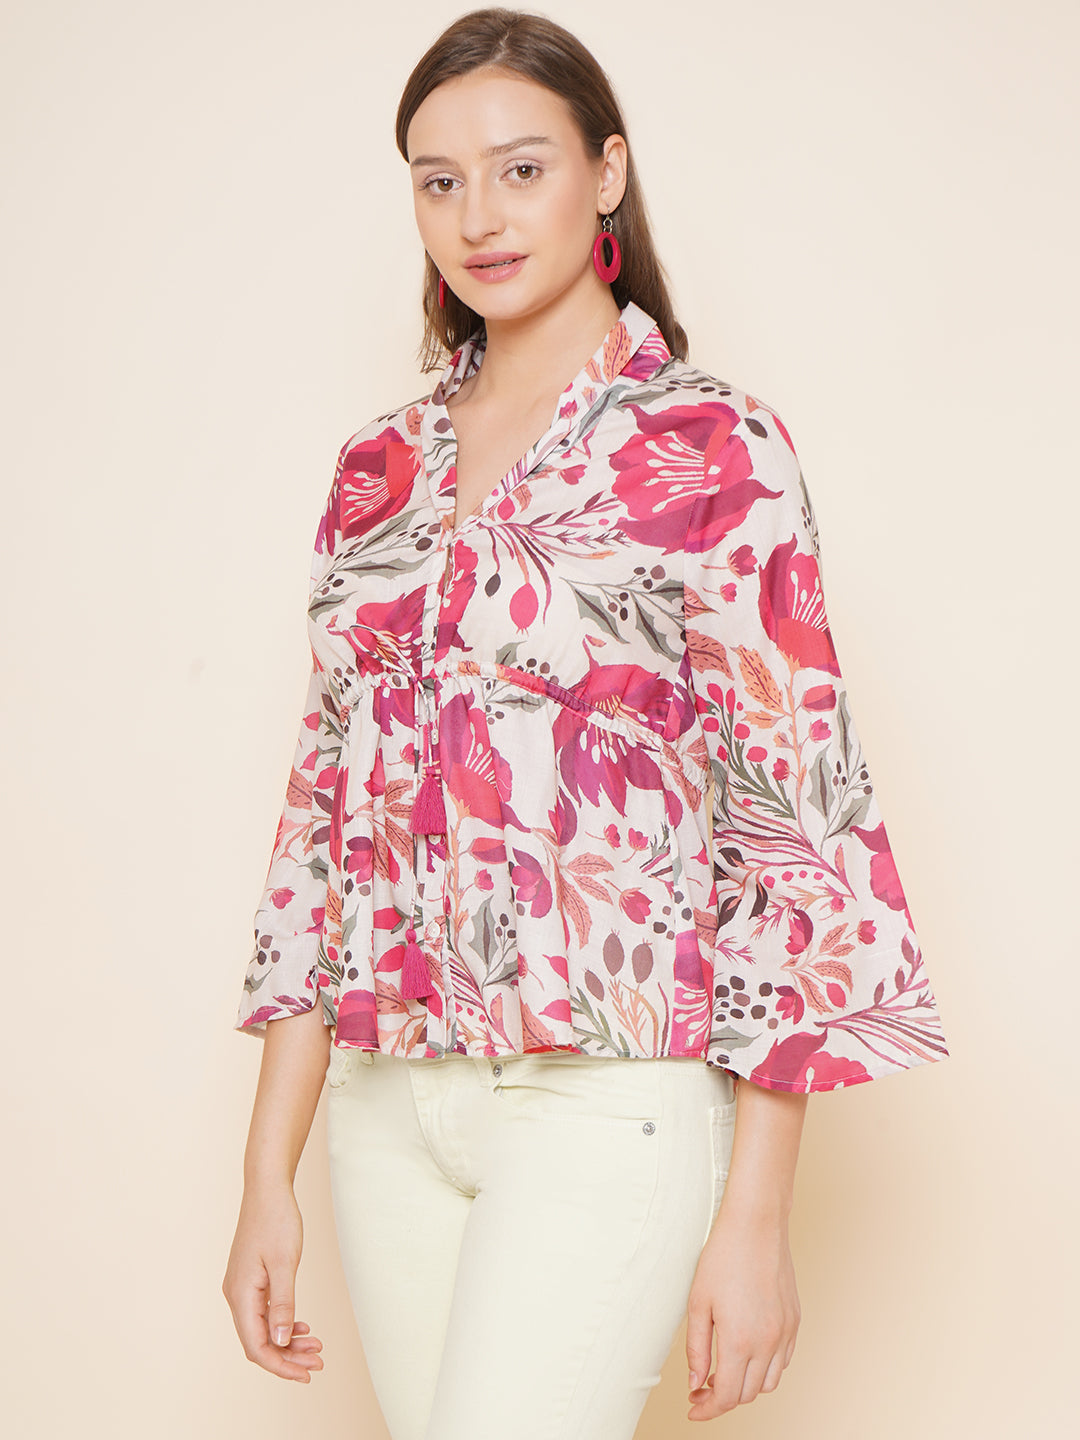 Bhama Couture Pink & White Printed Top